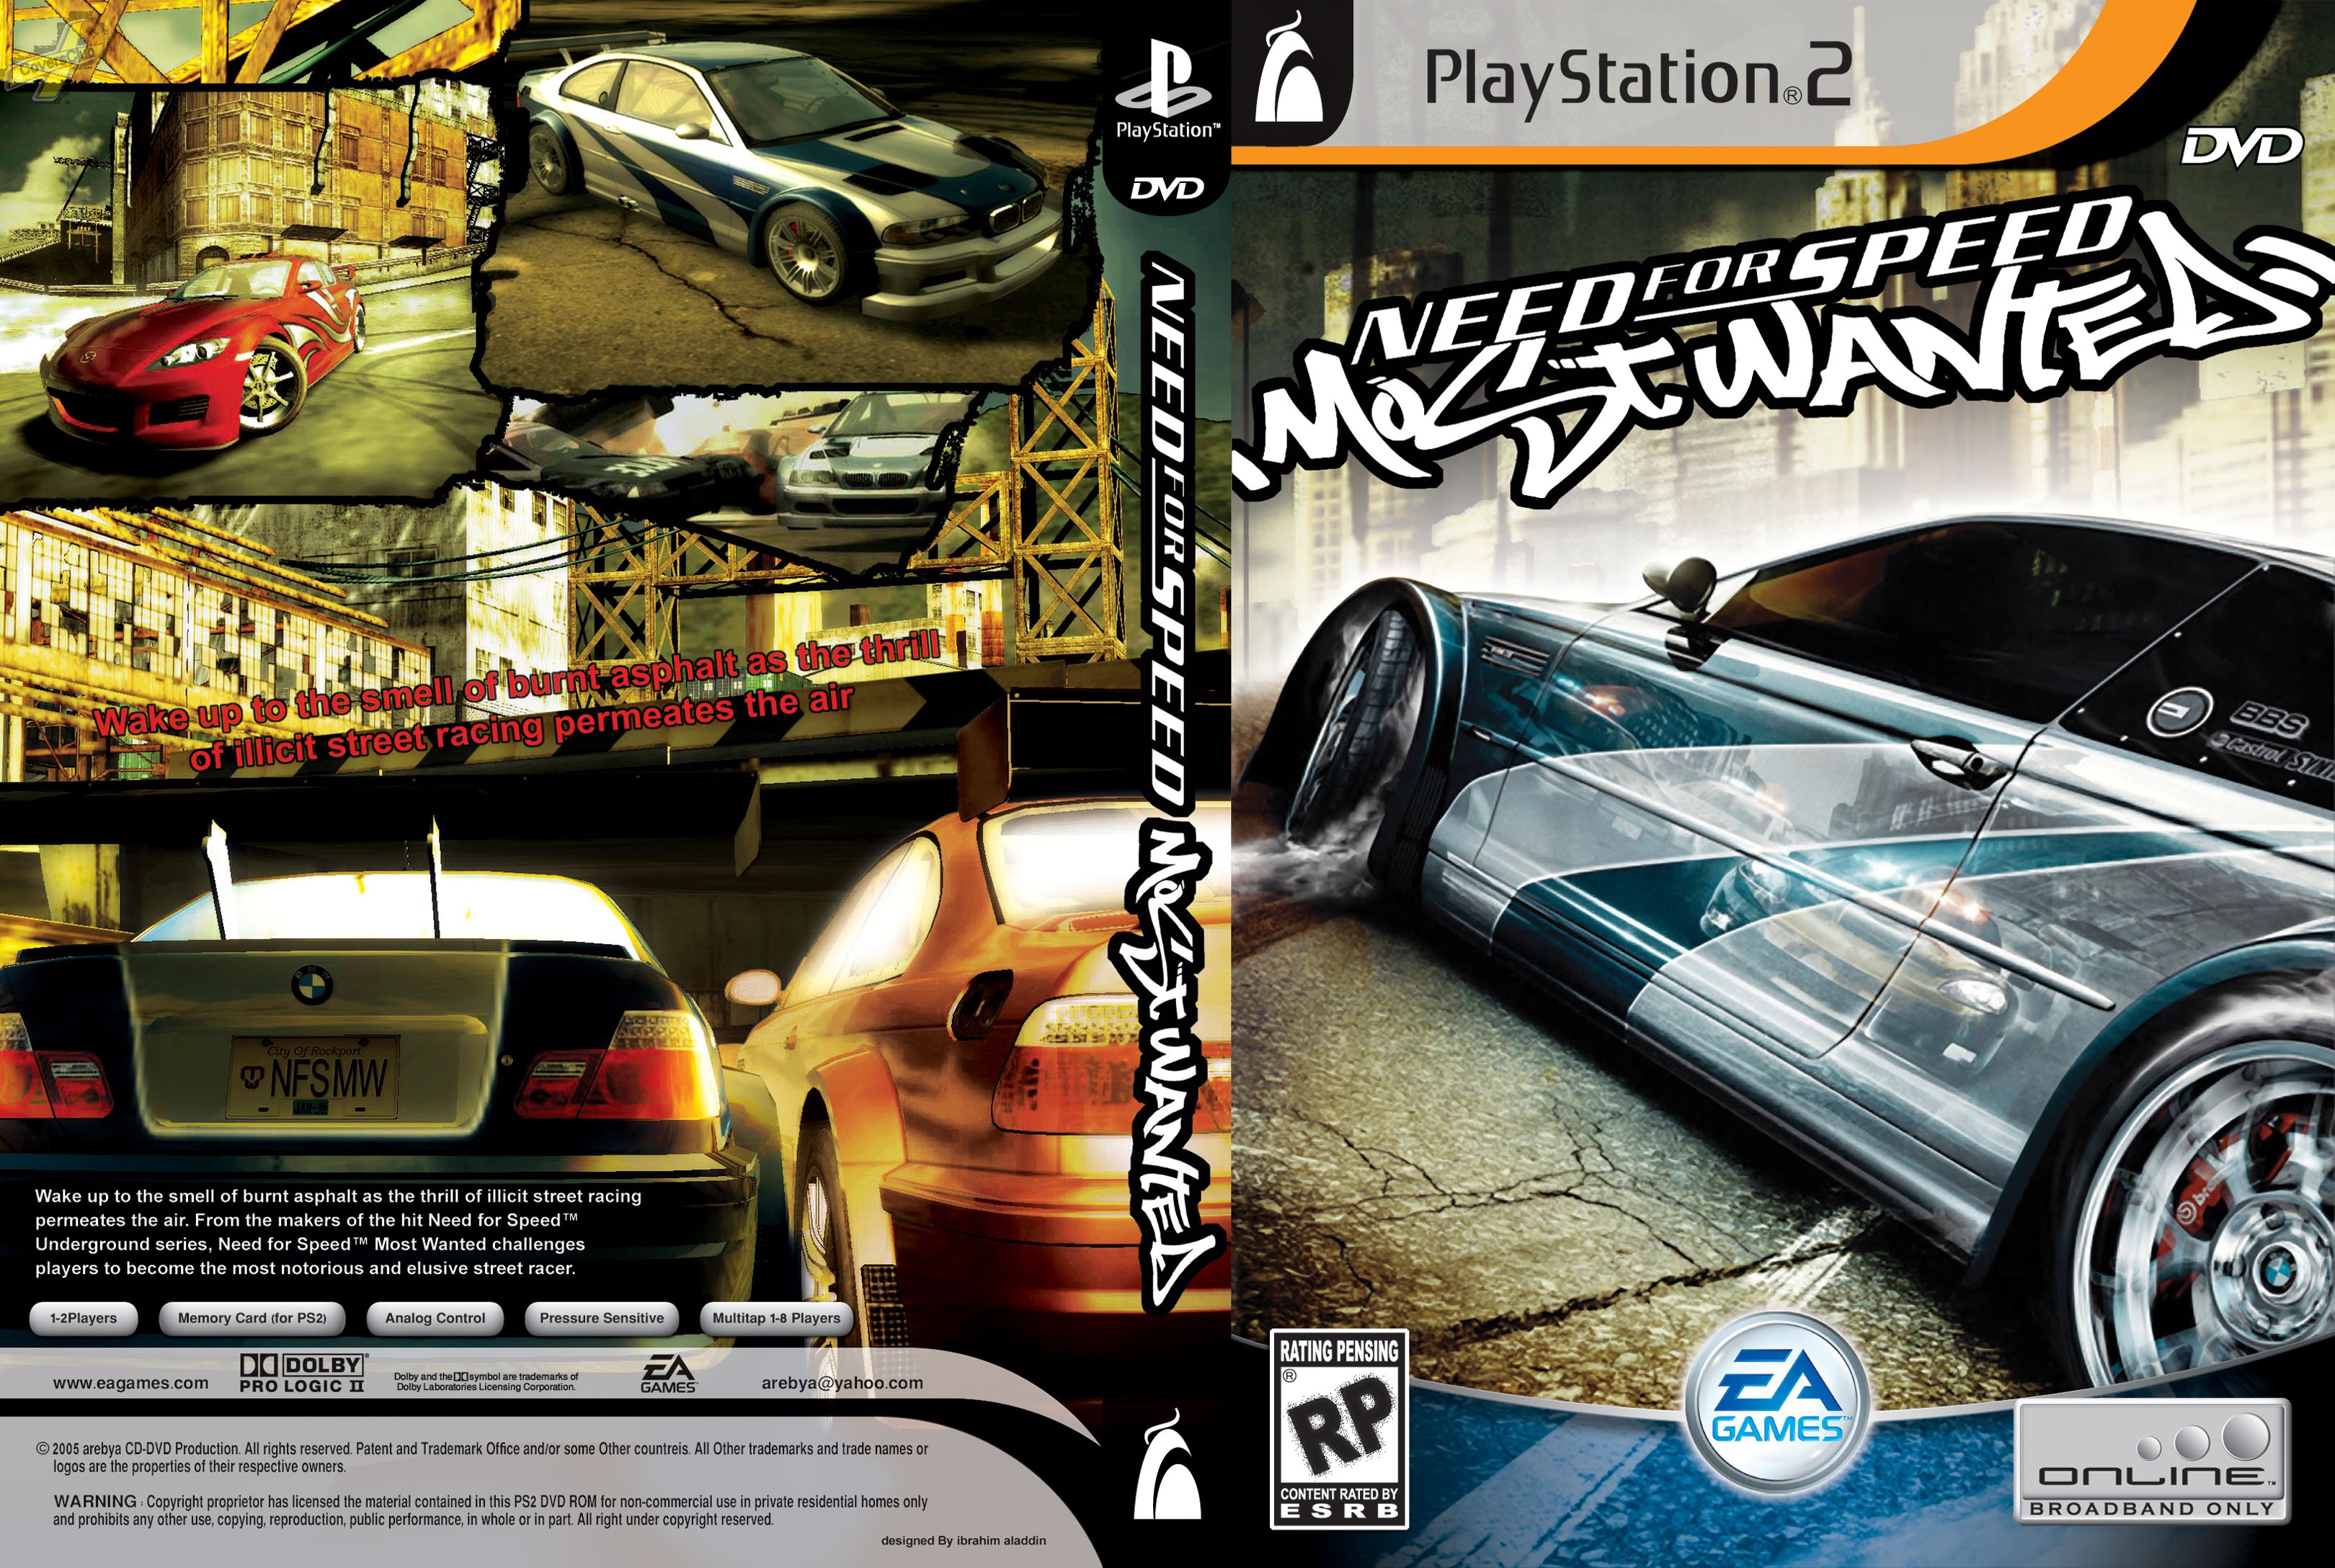 how to get a lot of money in nfs most wanted ps2